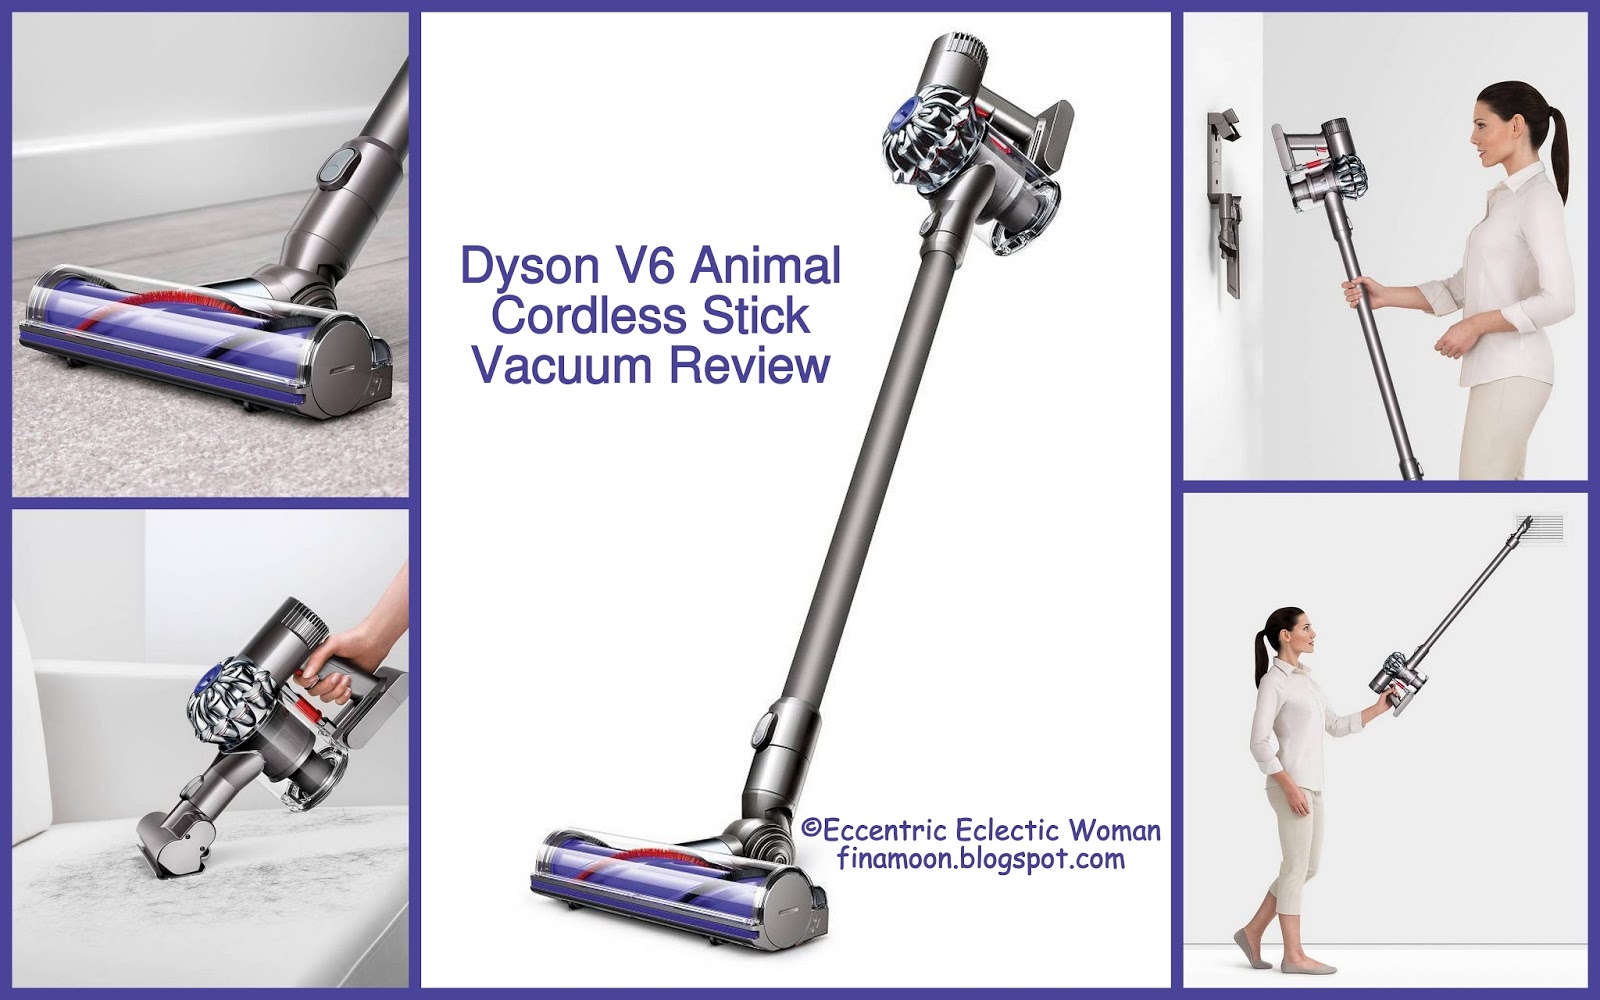 Eccentric Eclectic Woman: Dyson V6 Animal Cordless Stick Vacuum Review #CleanEverywhere